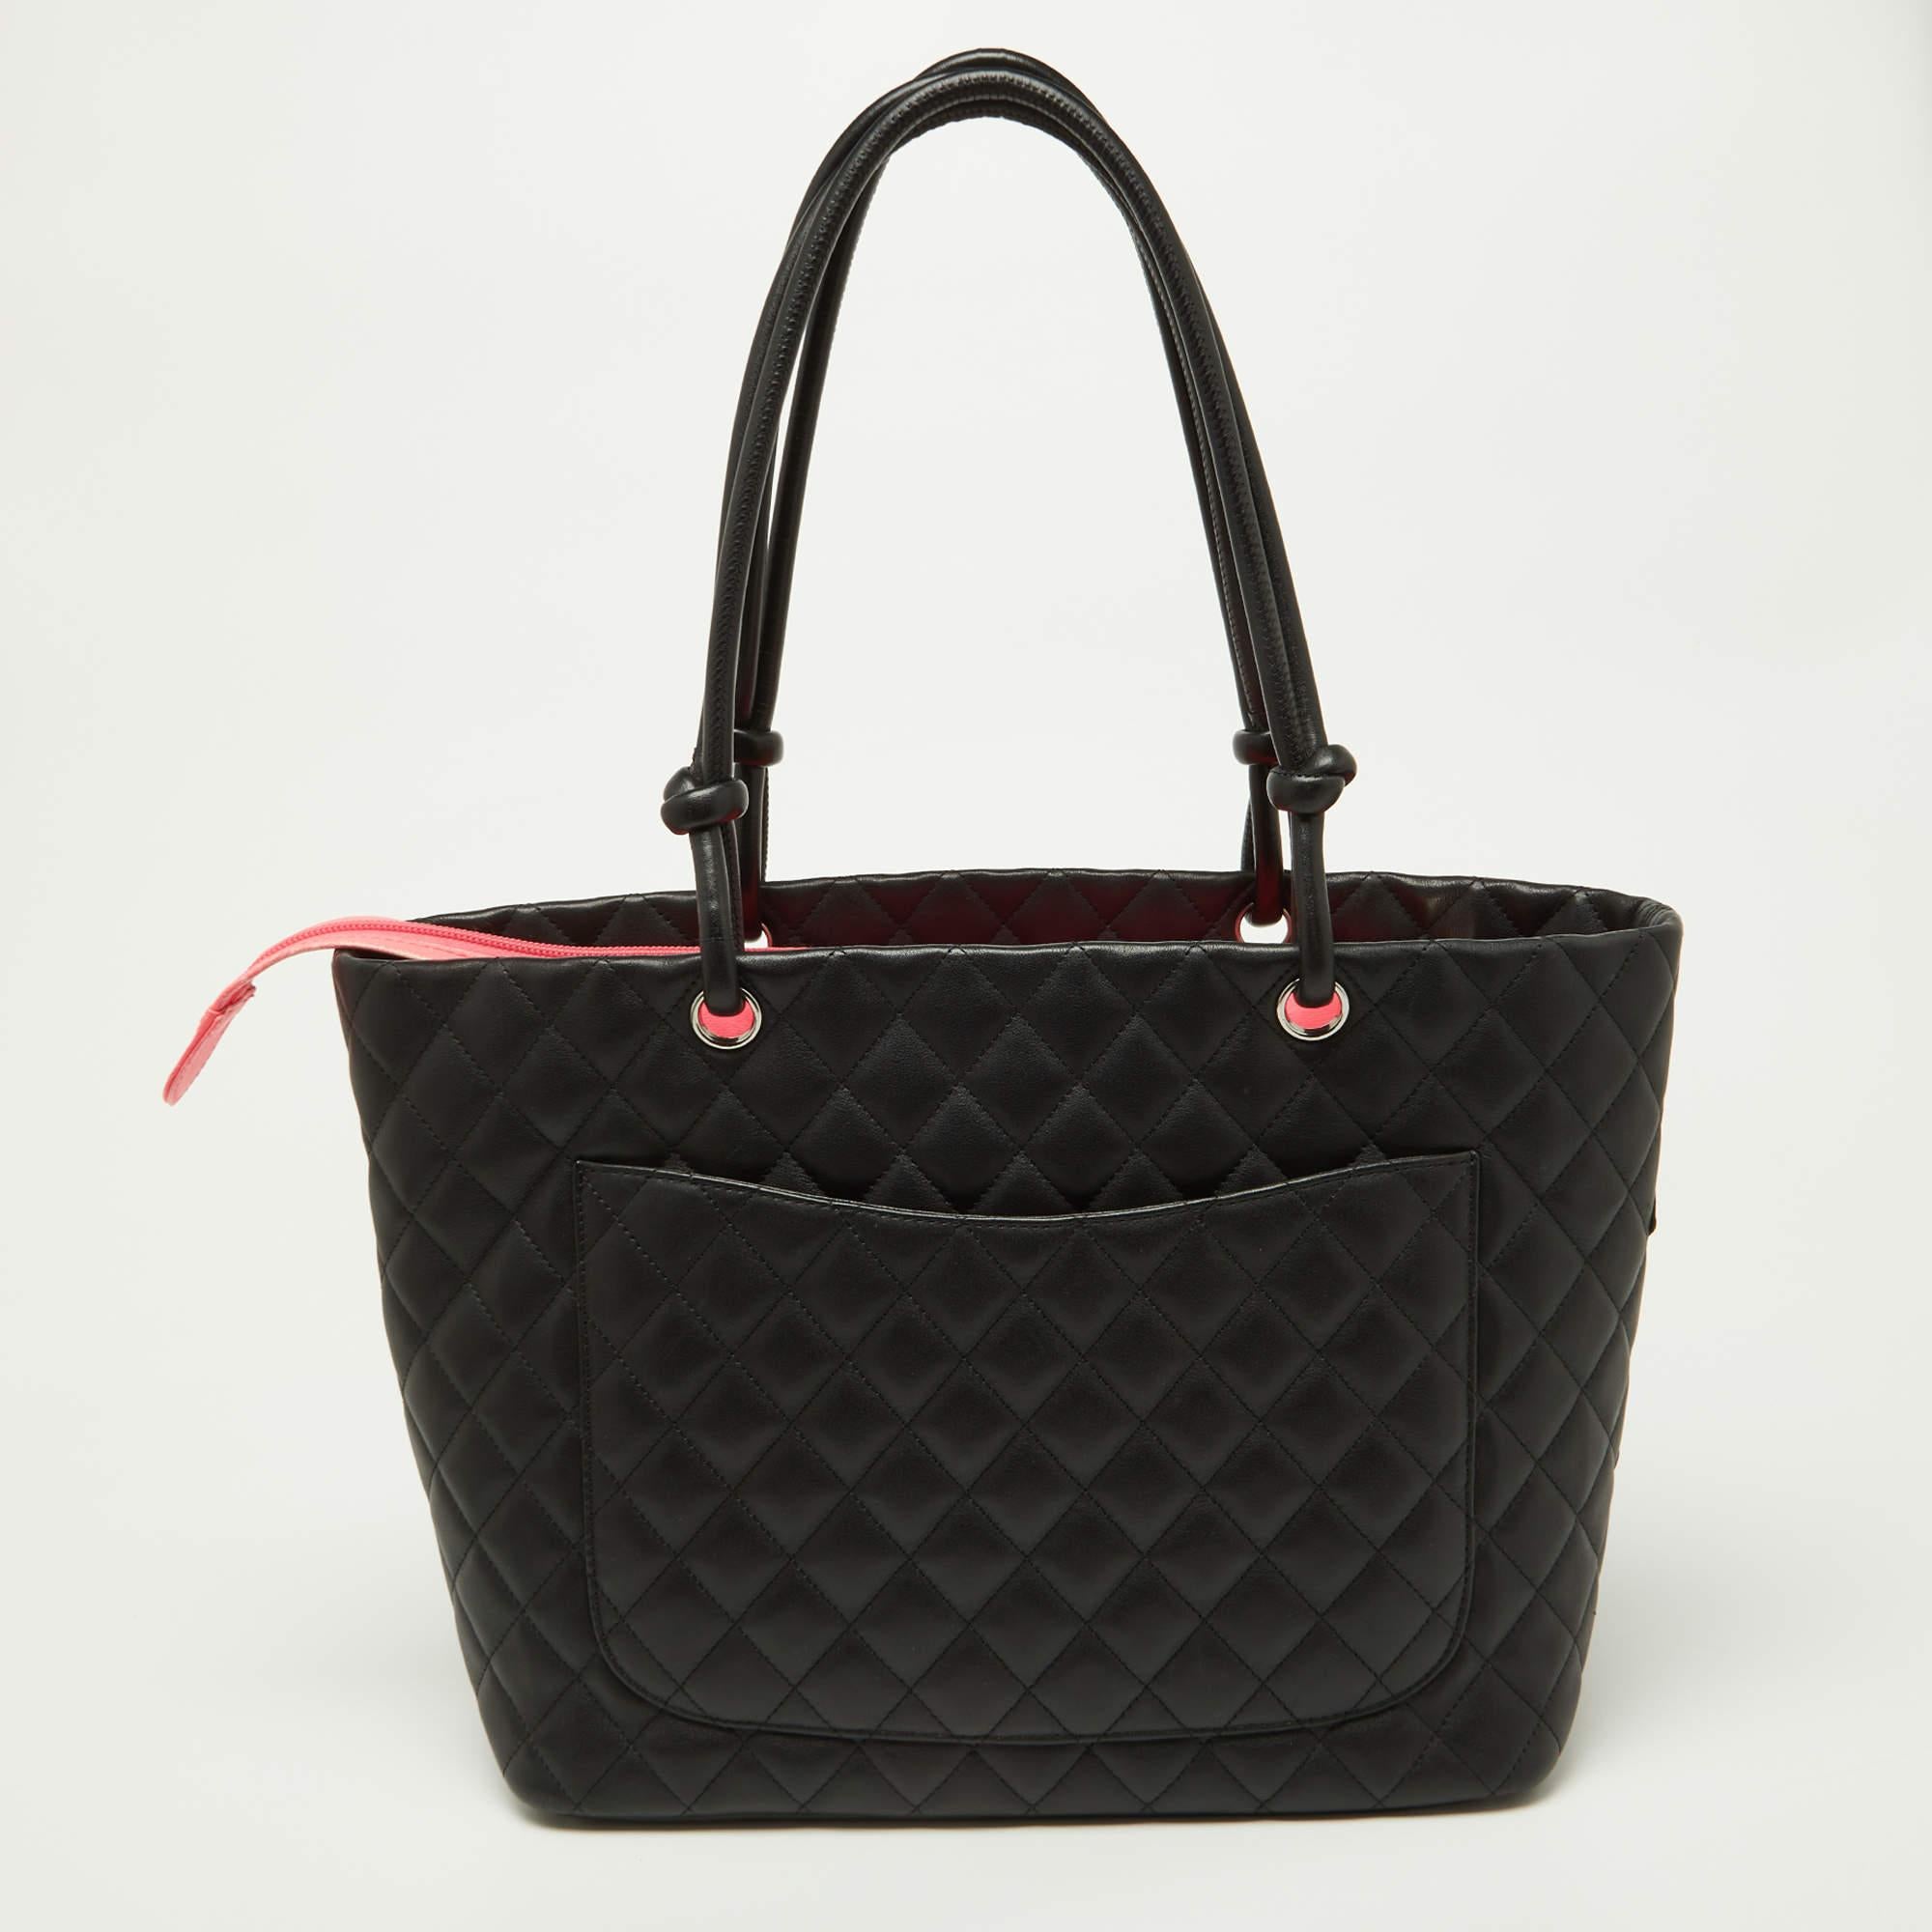 Perfect for work or travel, this Chanel tote is made of quilted leather to be classy and durable. It has knotted shoulder handles, a front CC logo, and a spacious lined interior.

